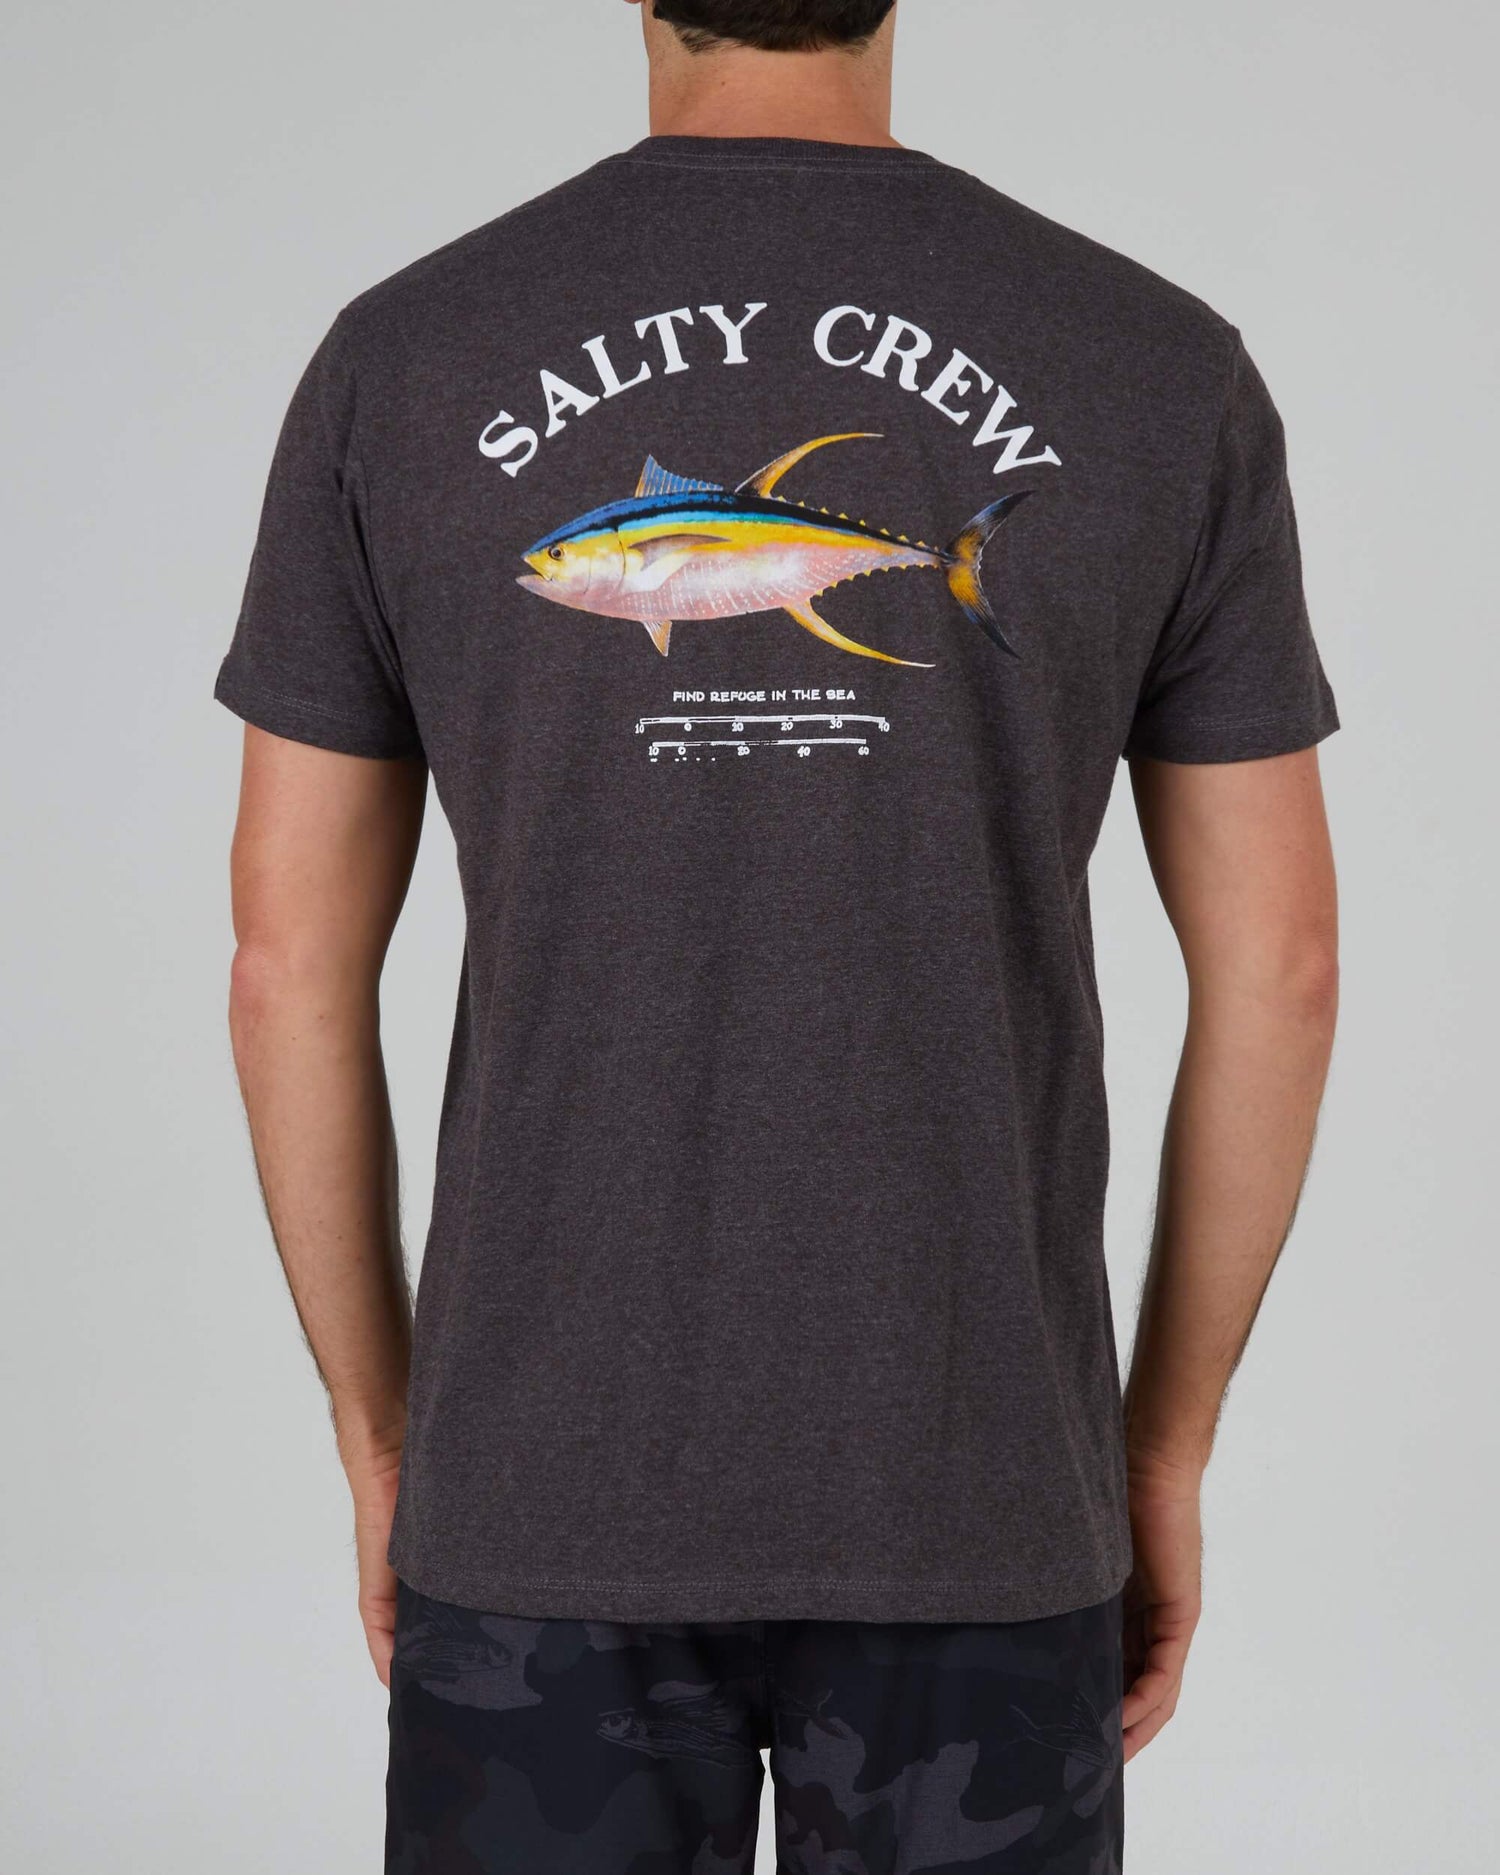 Salty crew T-SHIRTS S/S Ahi Mount S/S Tee - Charcoal Heather in CHARCOAL HEATHER